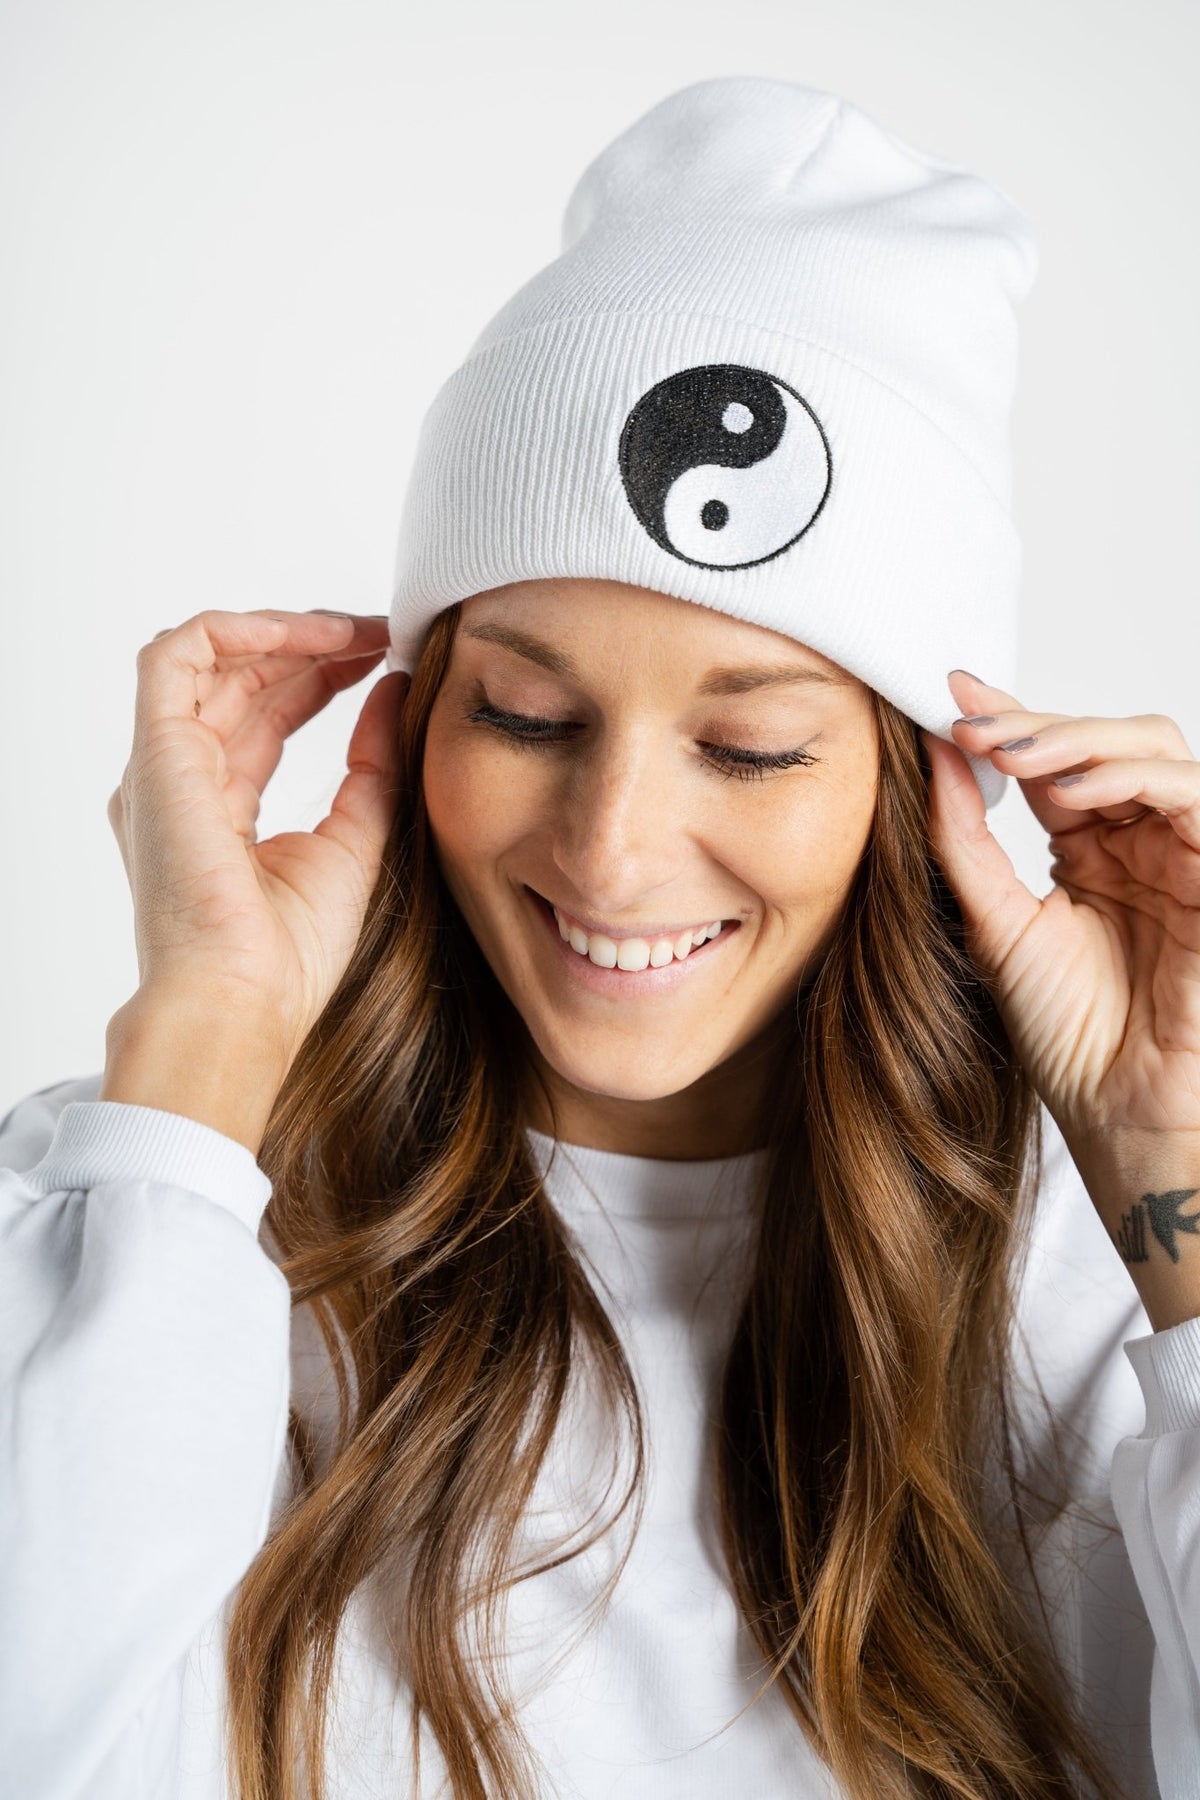 Yin yang beanie white - Trendy Beanies at Lush Fashion Lounge Boutique in Oklahoma City